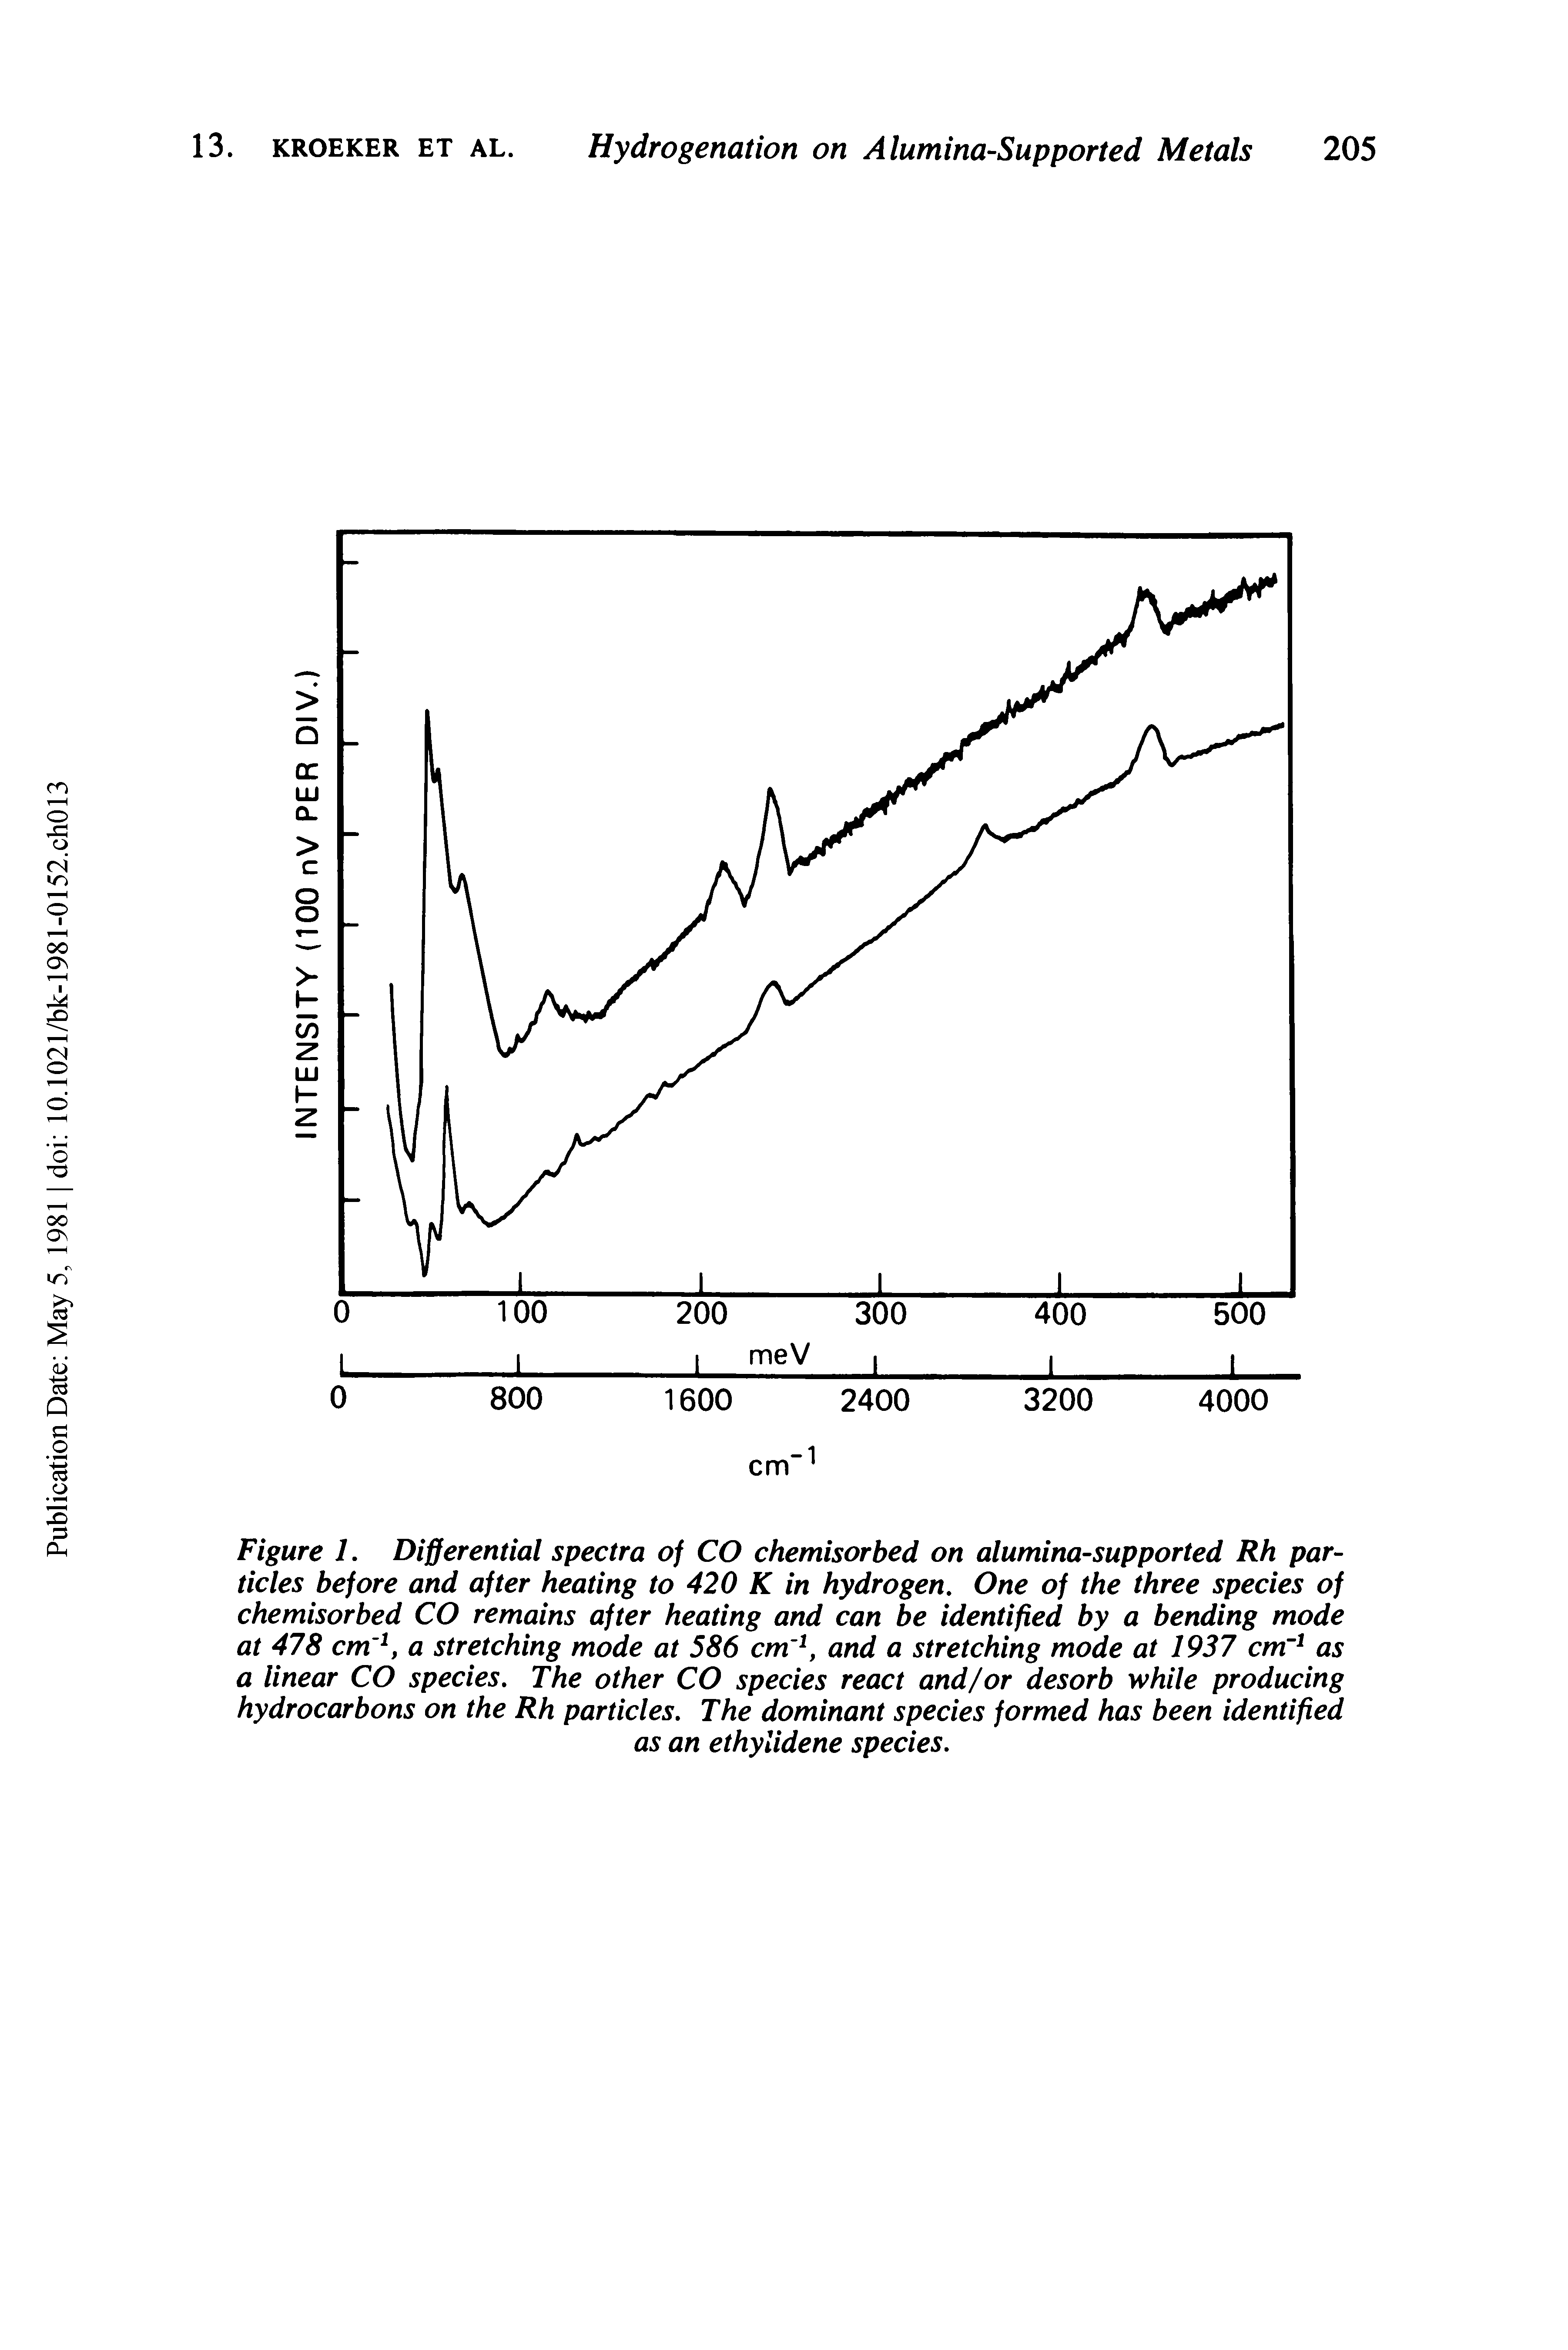 Figure 1. Differential spectra of CO chemisorbed on alumina-supported Rh particles before and after heating to 420 K in hydrogen. One of the three species of chemisorbed CO remains after heating and can be identified by a bending mode at 478 cm 1, a stretching mode at 586 cm 1, and a stretching mode at 1937 cmr1 as a linear CO species. The other CO species react and/or desorb while producing hydrocarbons on the Rh particles. The dominant species formed has been identified...